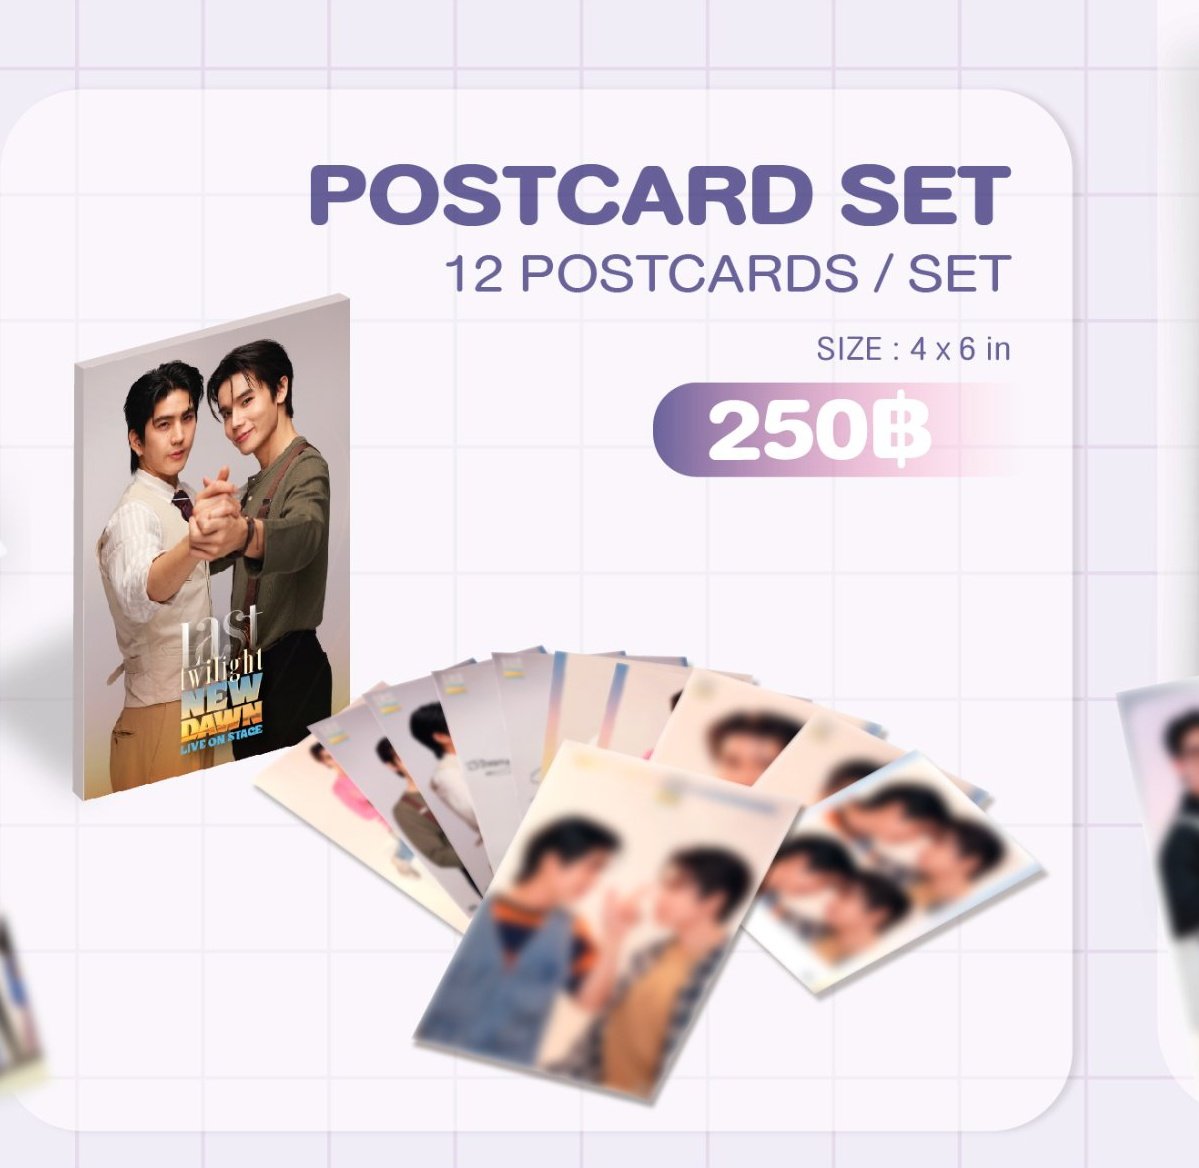 @imnot_alsh Is this from the Postcard Set?
Did you just buy this as any other Postcard Set or you win a contest?